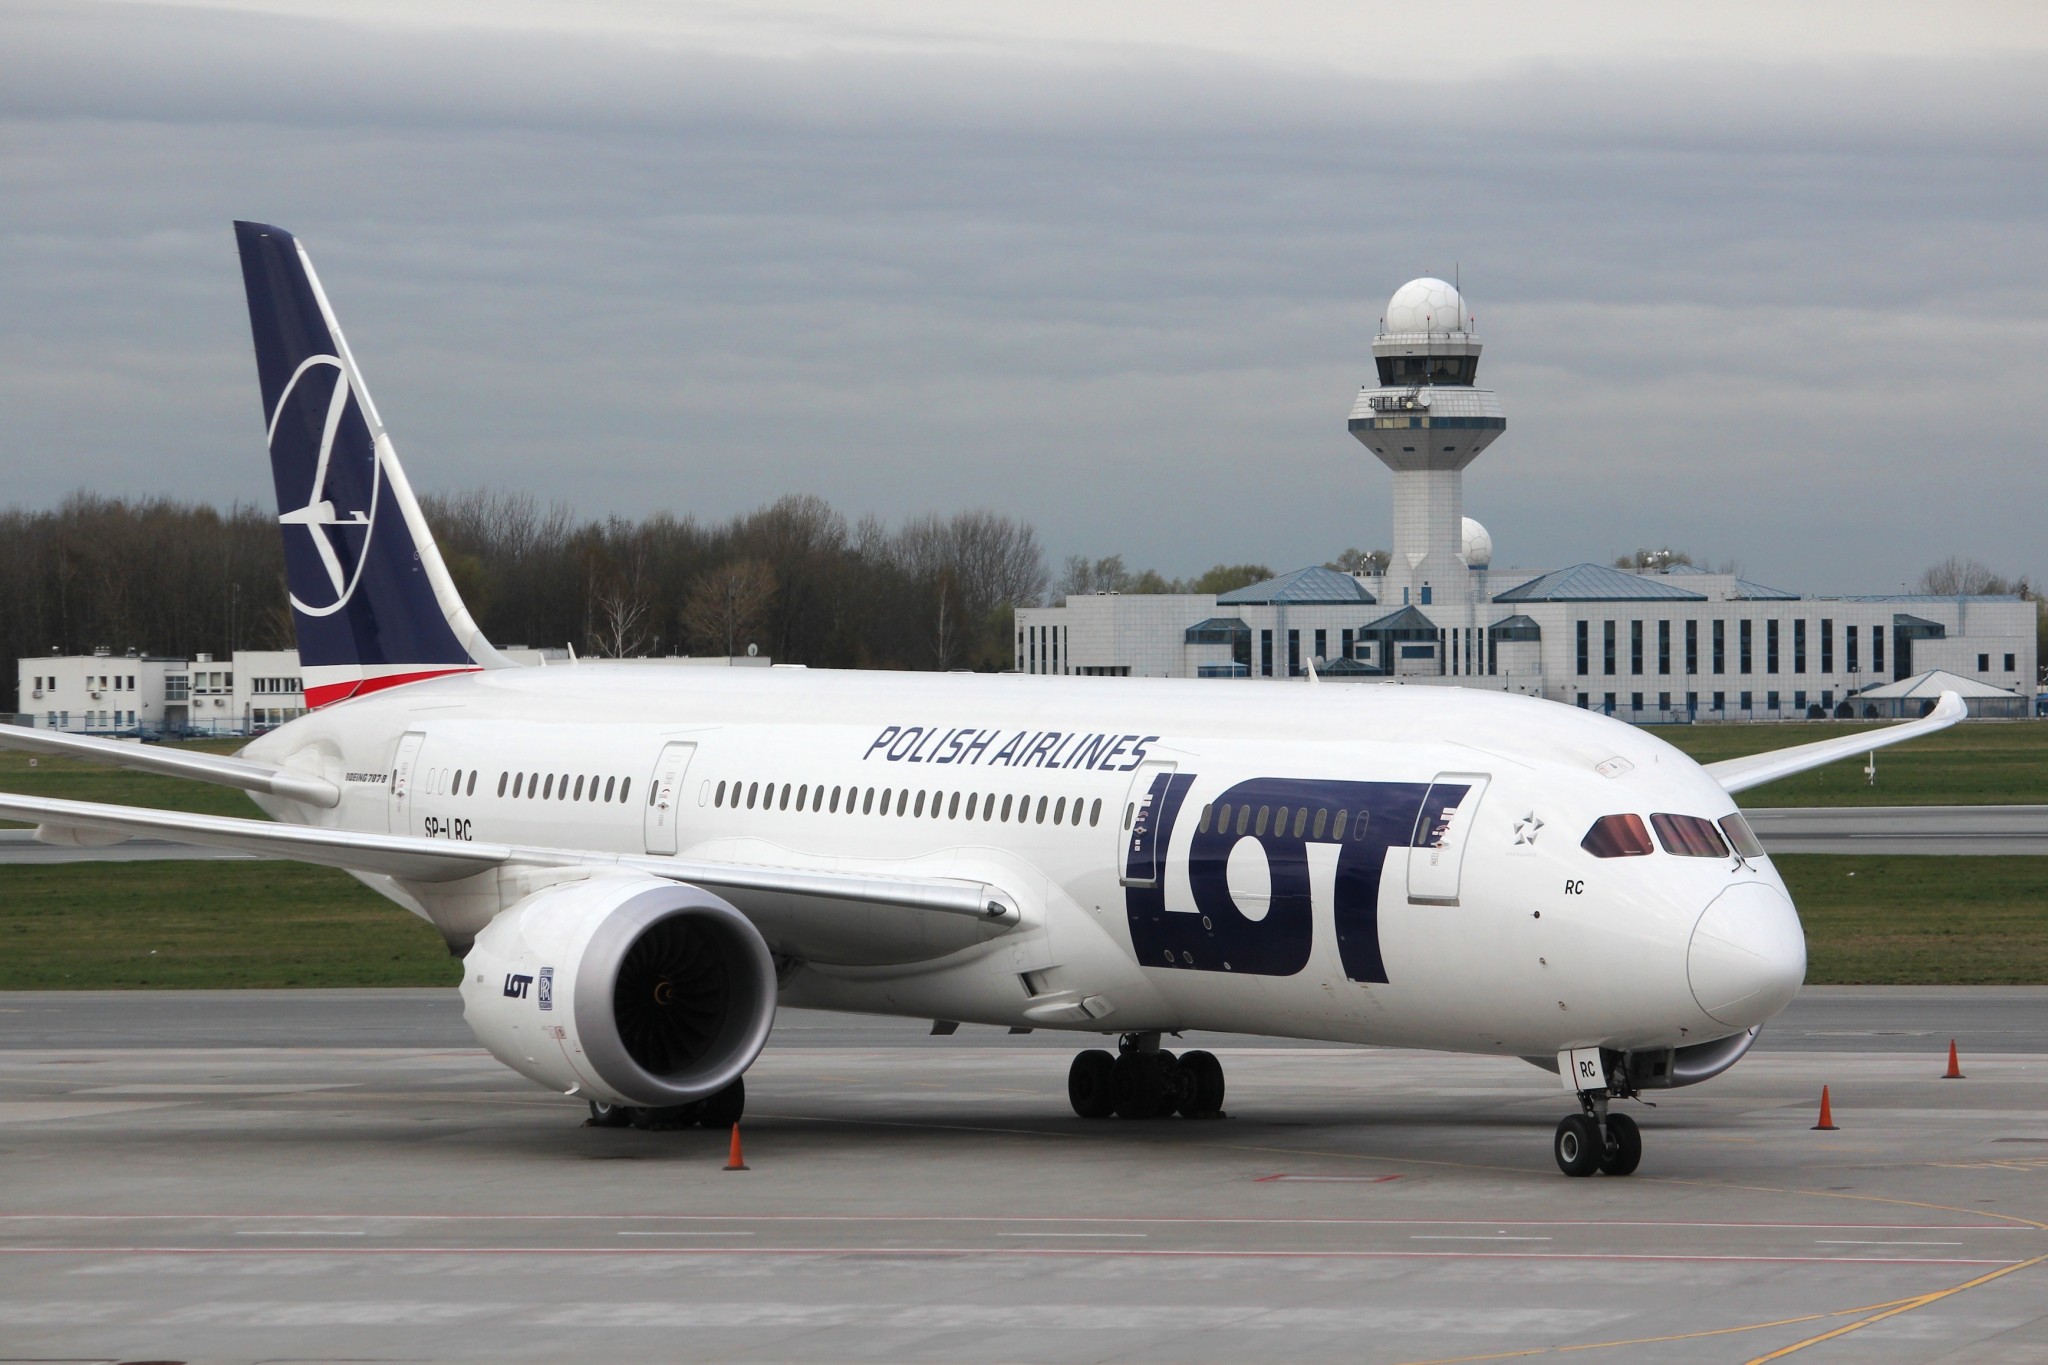 LOT launches new direct route to Stuttgart